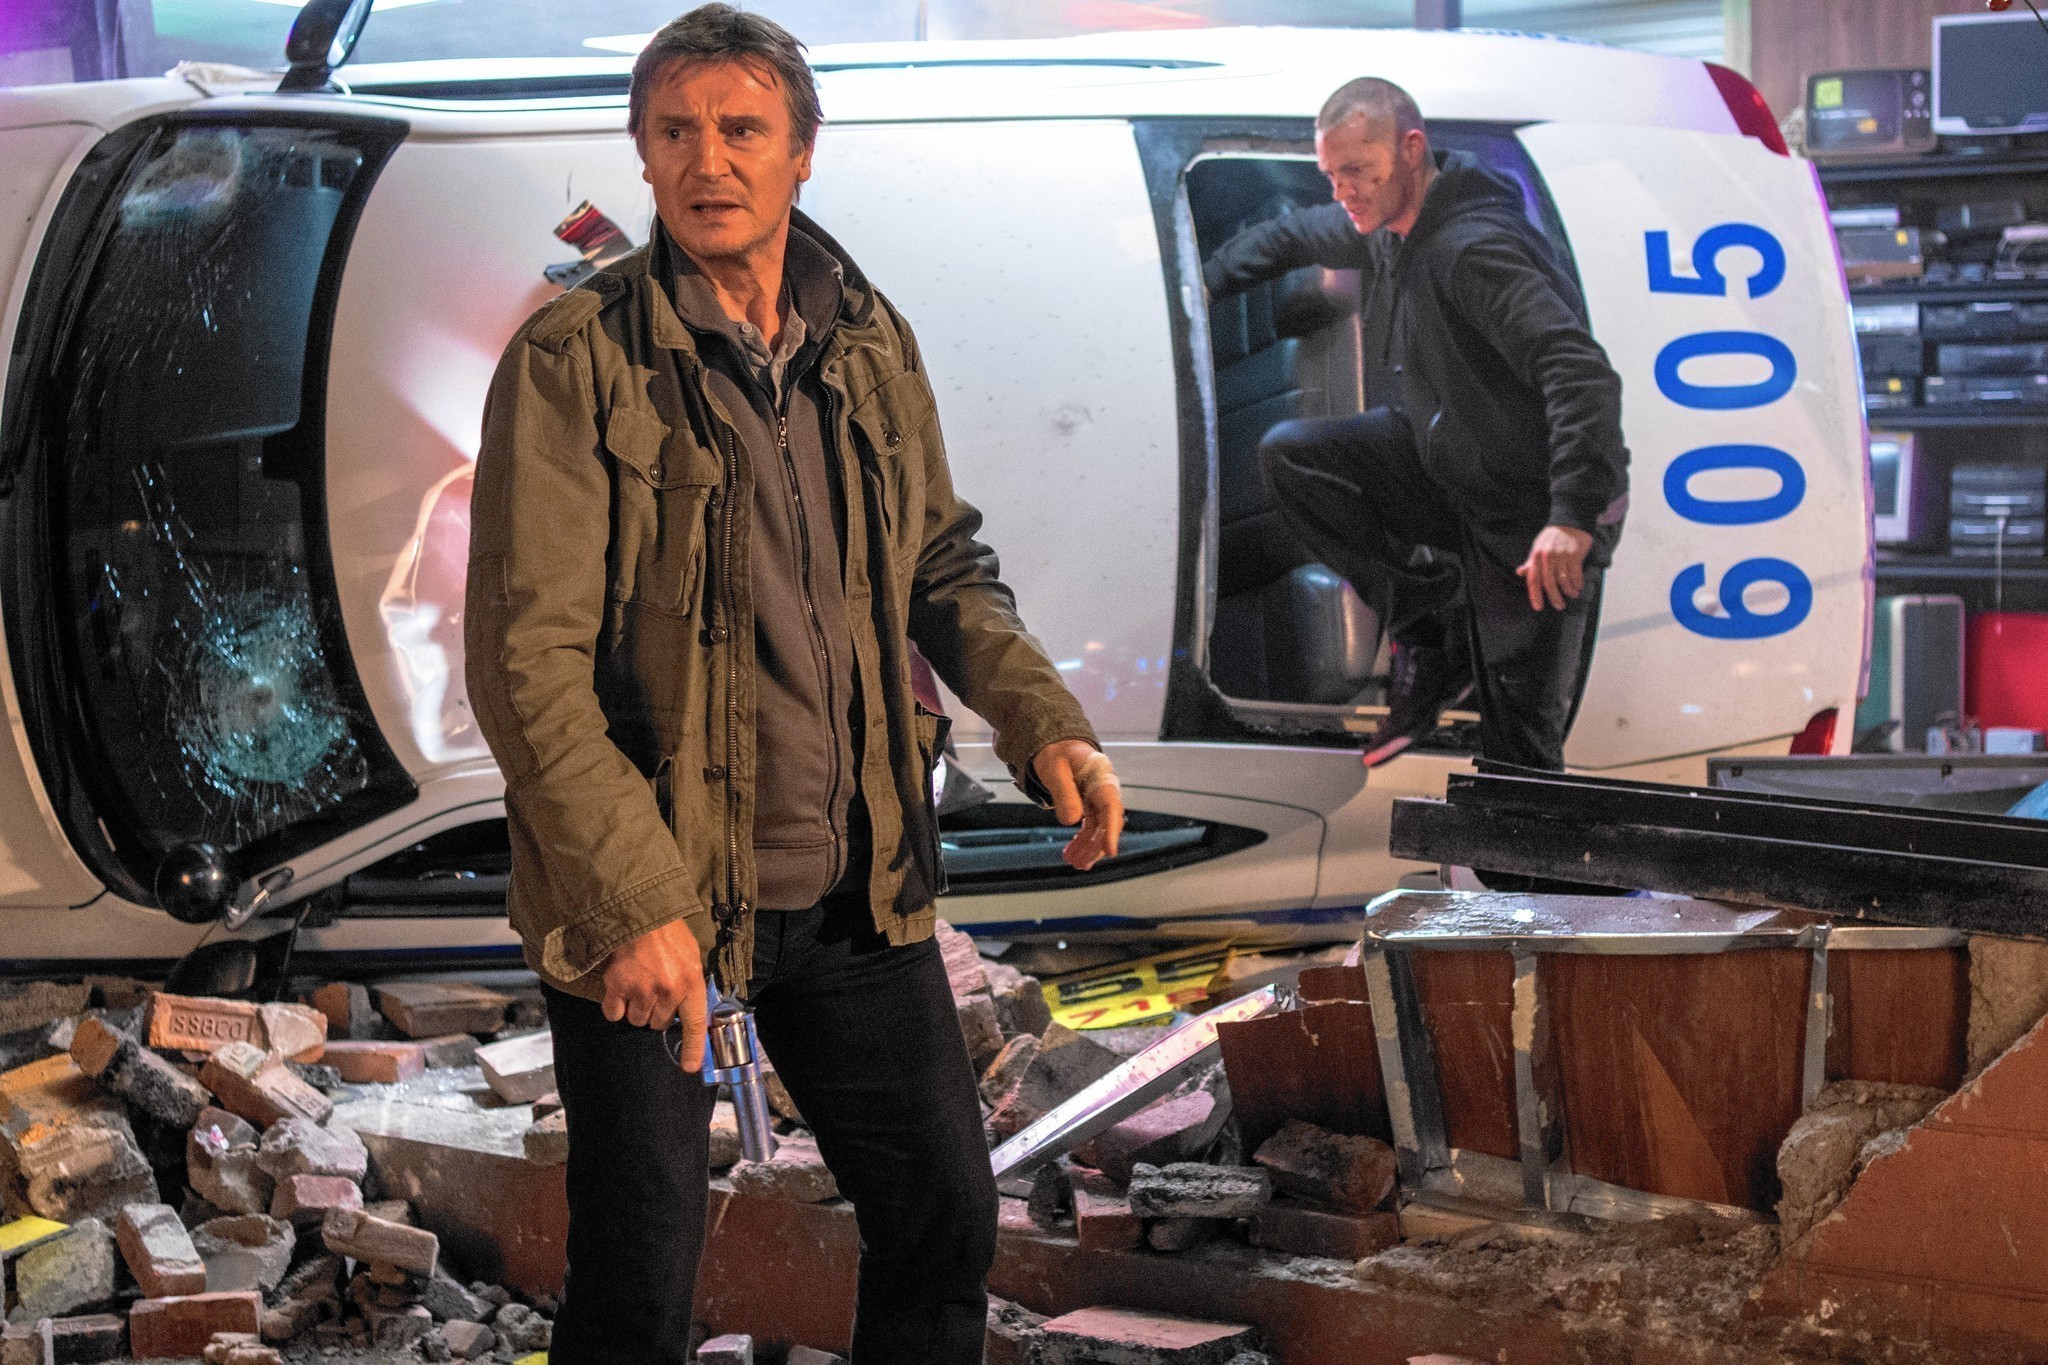 Liam Neeson's Run All Night Movie Trailer And Wallpapers - XciteFun.net